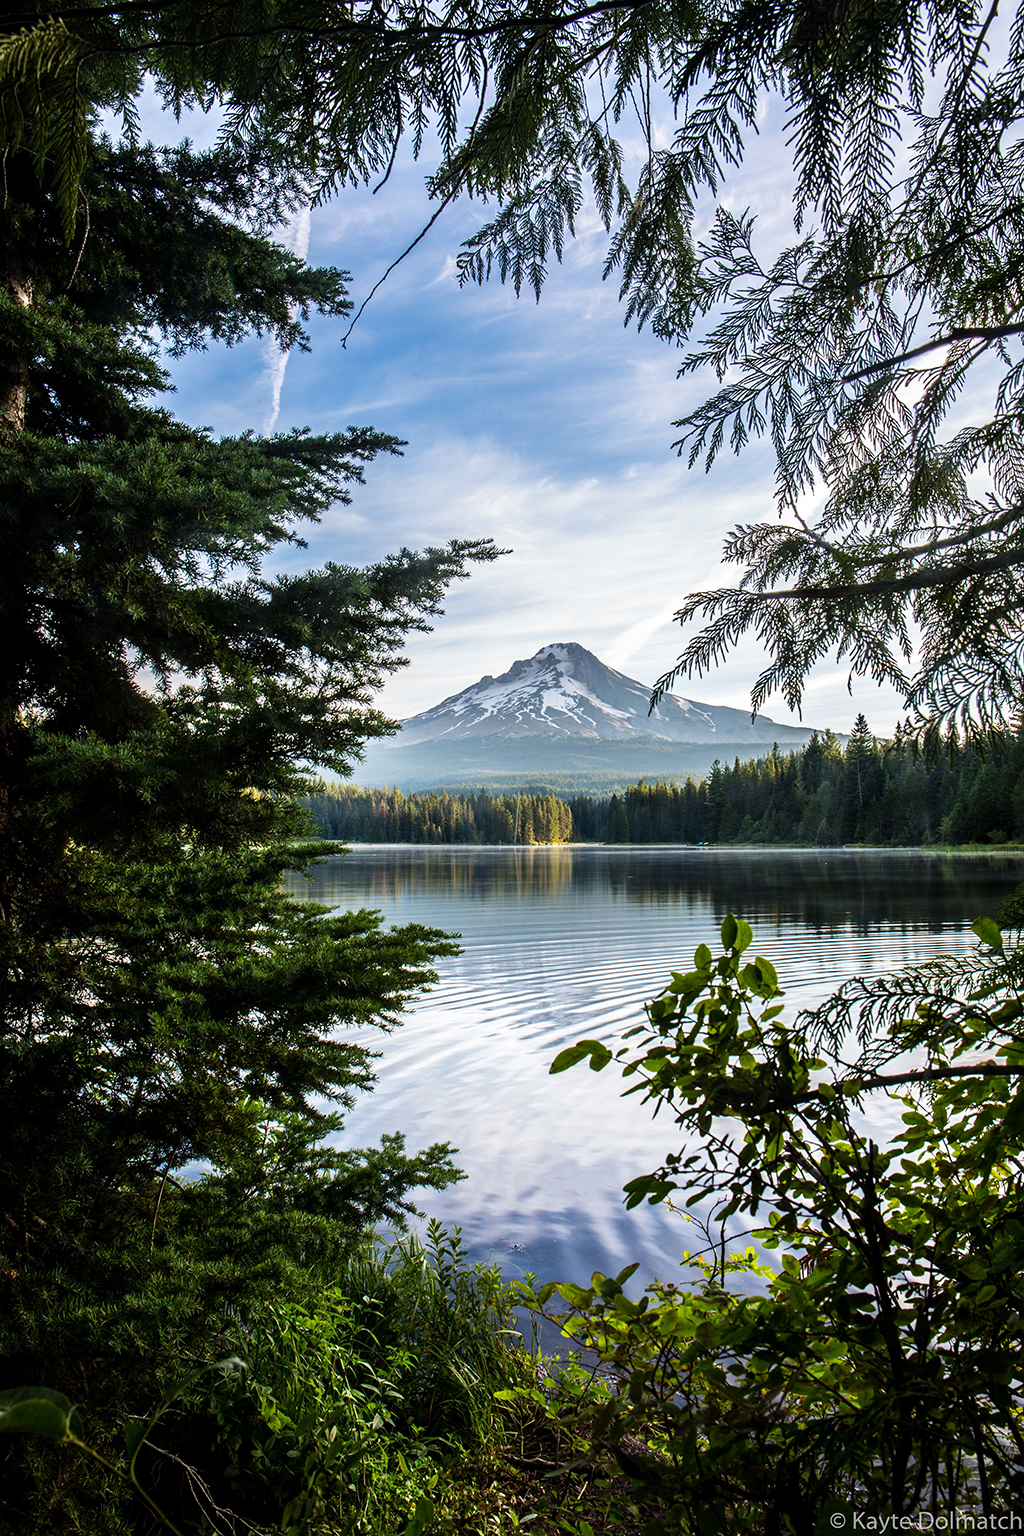 Today’s Photo Of The Day is “Nature’s Window” by Kayte Dolmatch. Location: Trillium Lake, Oregon. 